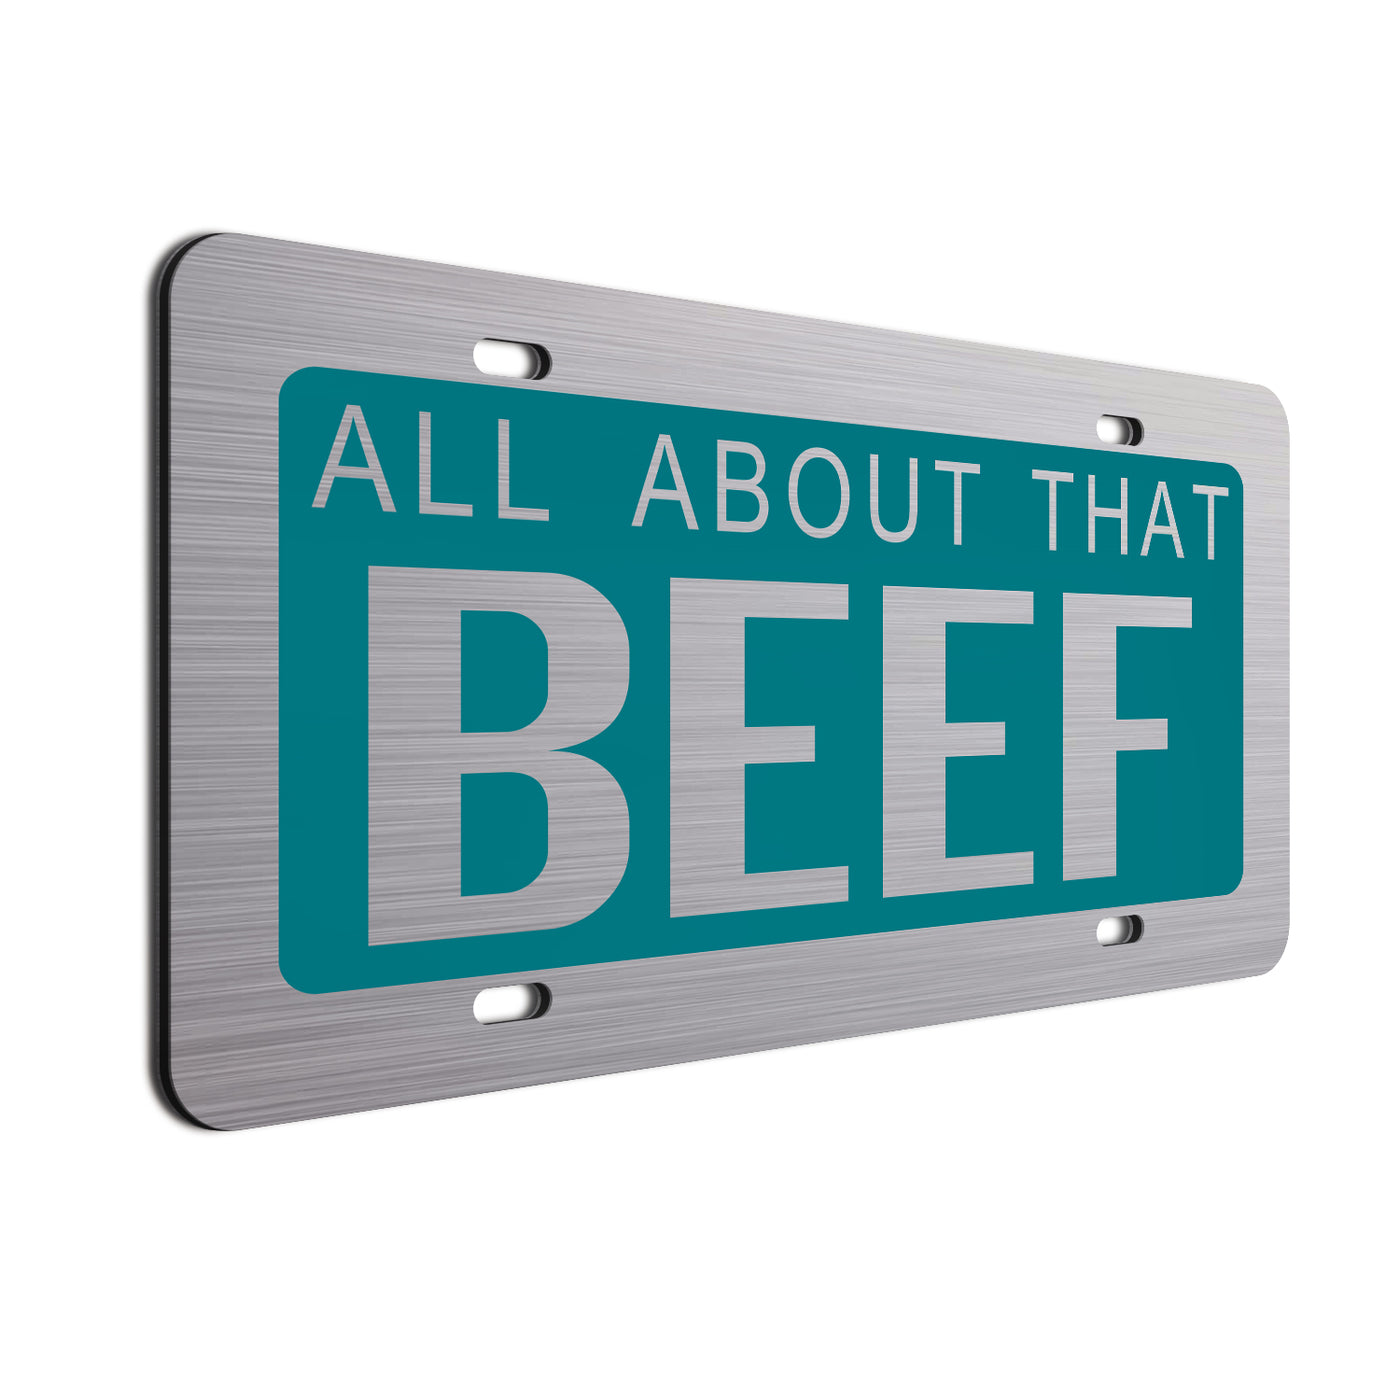  All About That Beef Car License Plate Teal